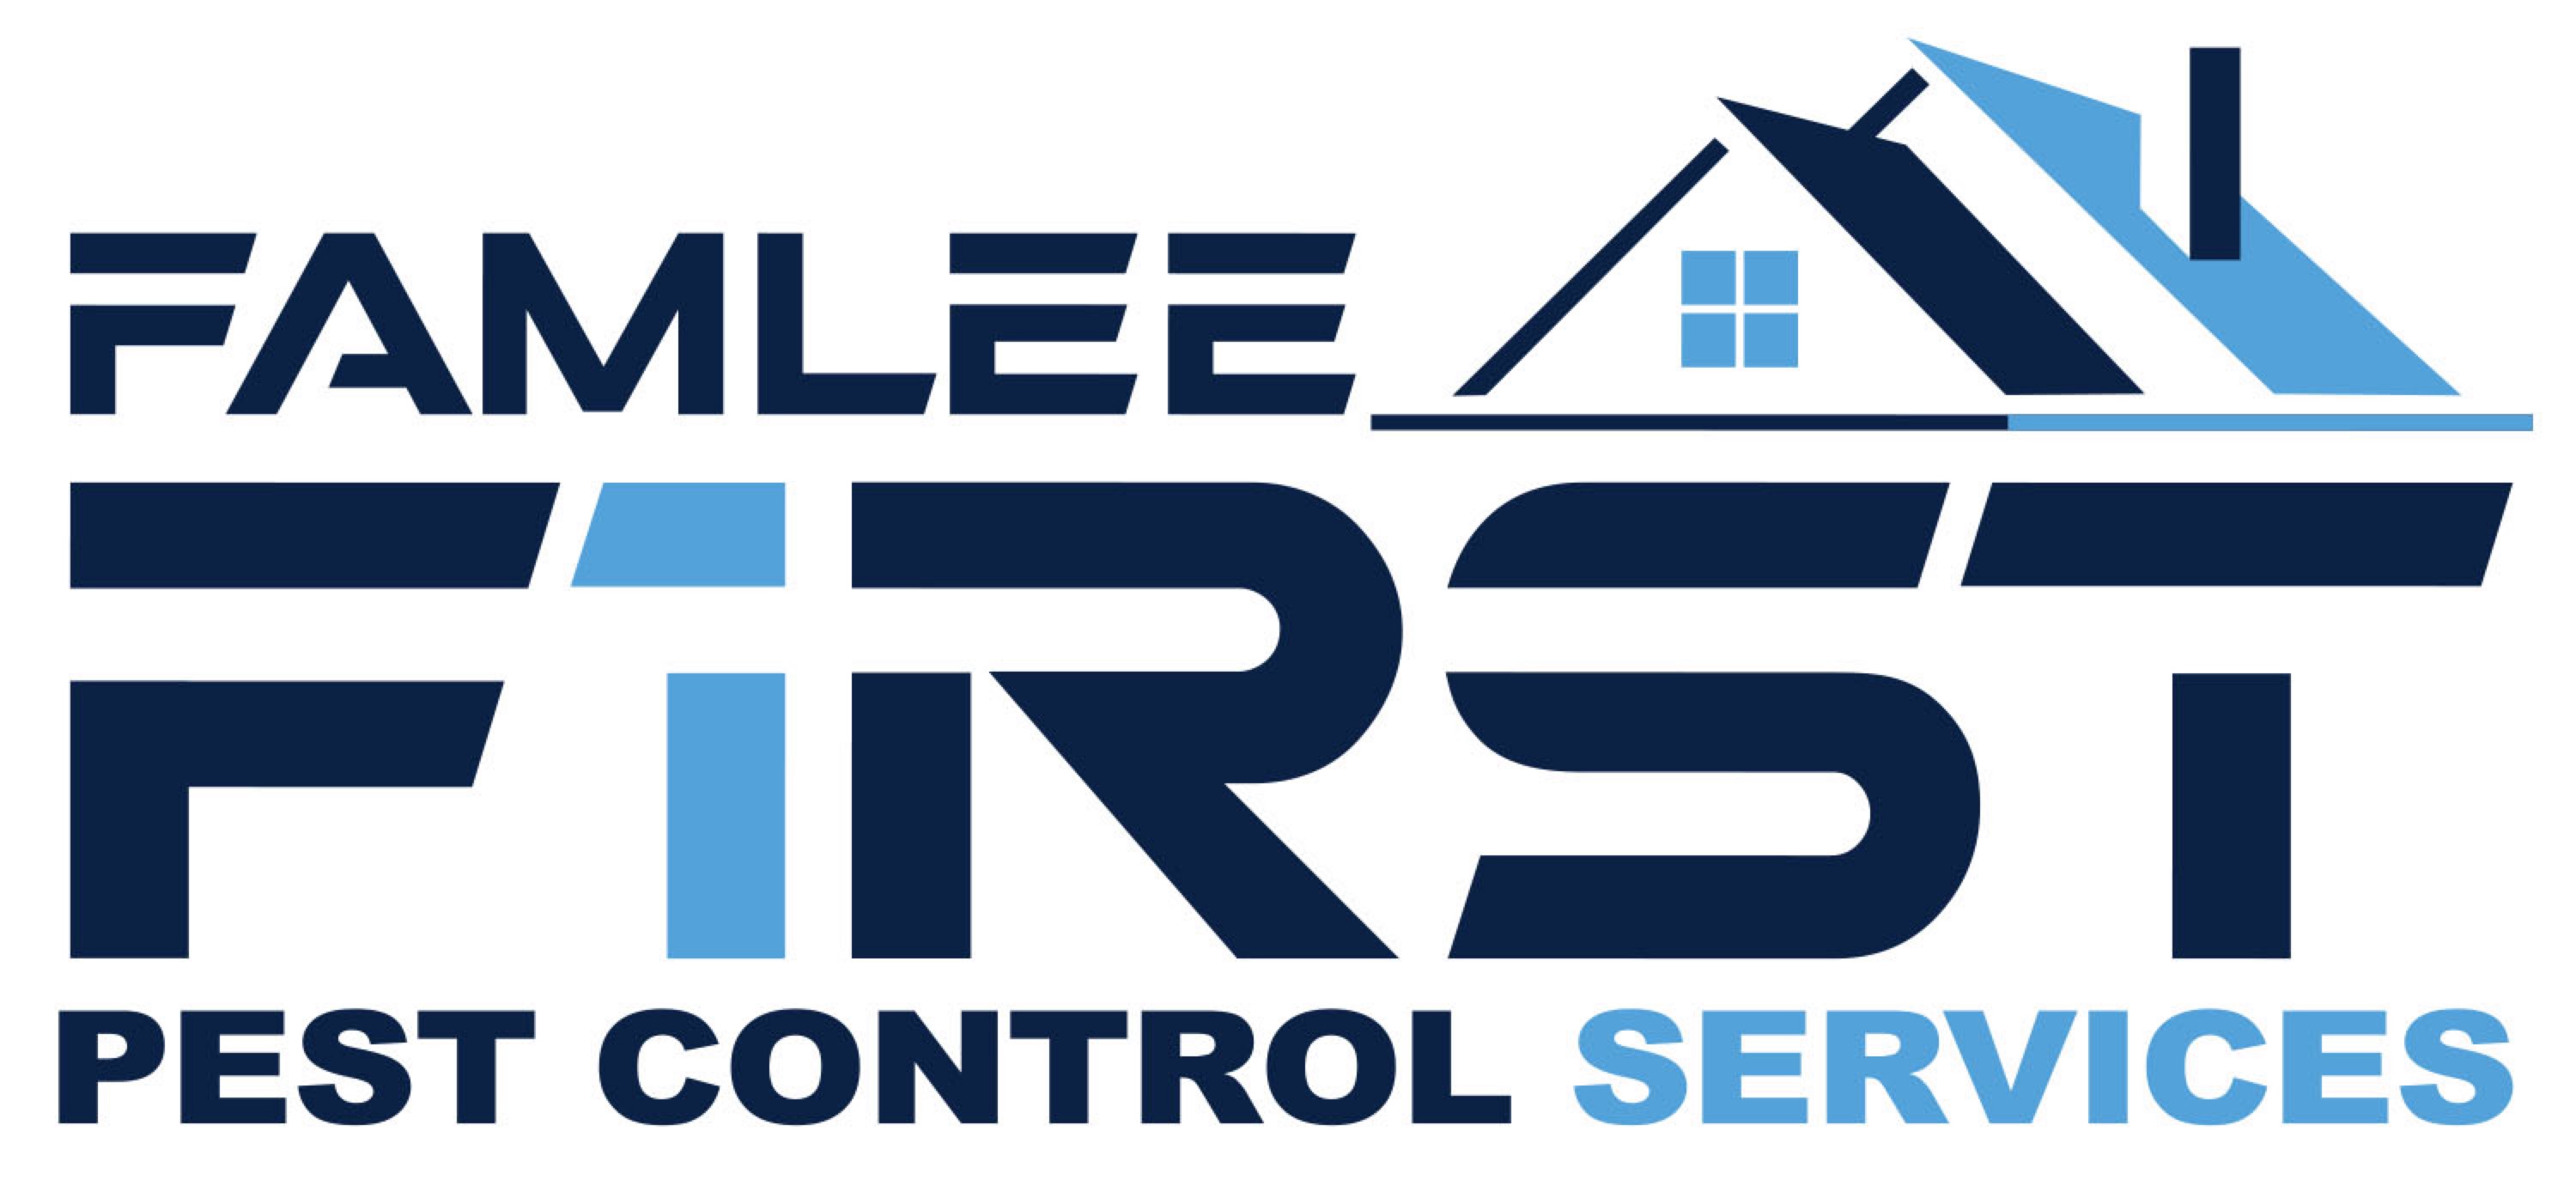 Famlee First Pest Control Services Logo